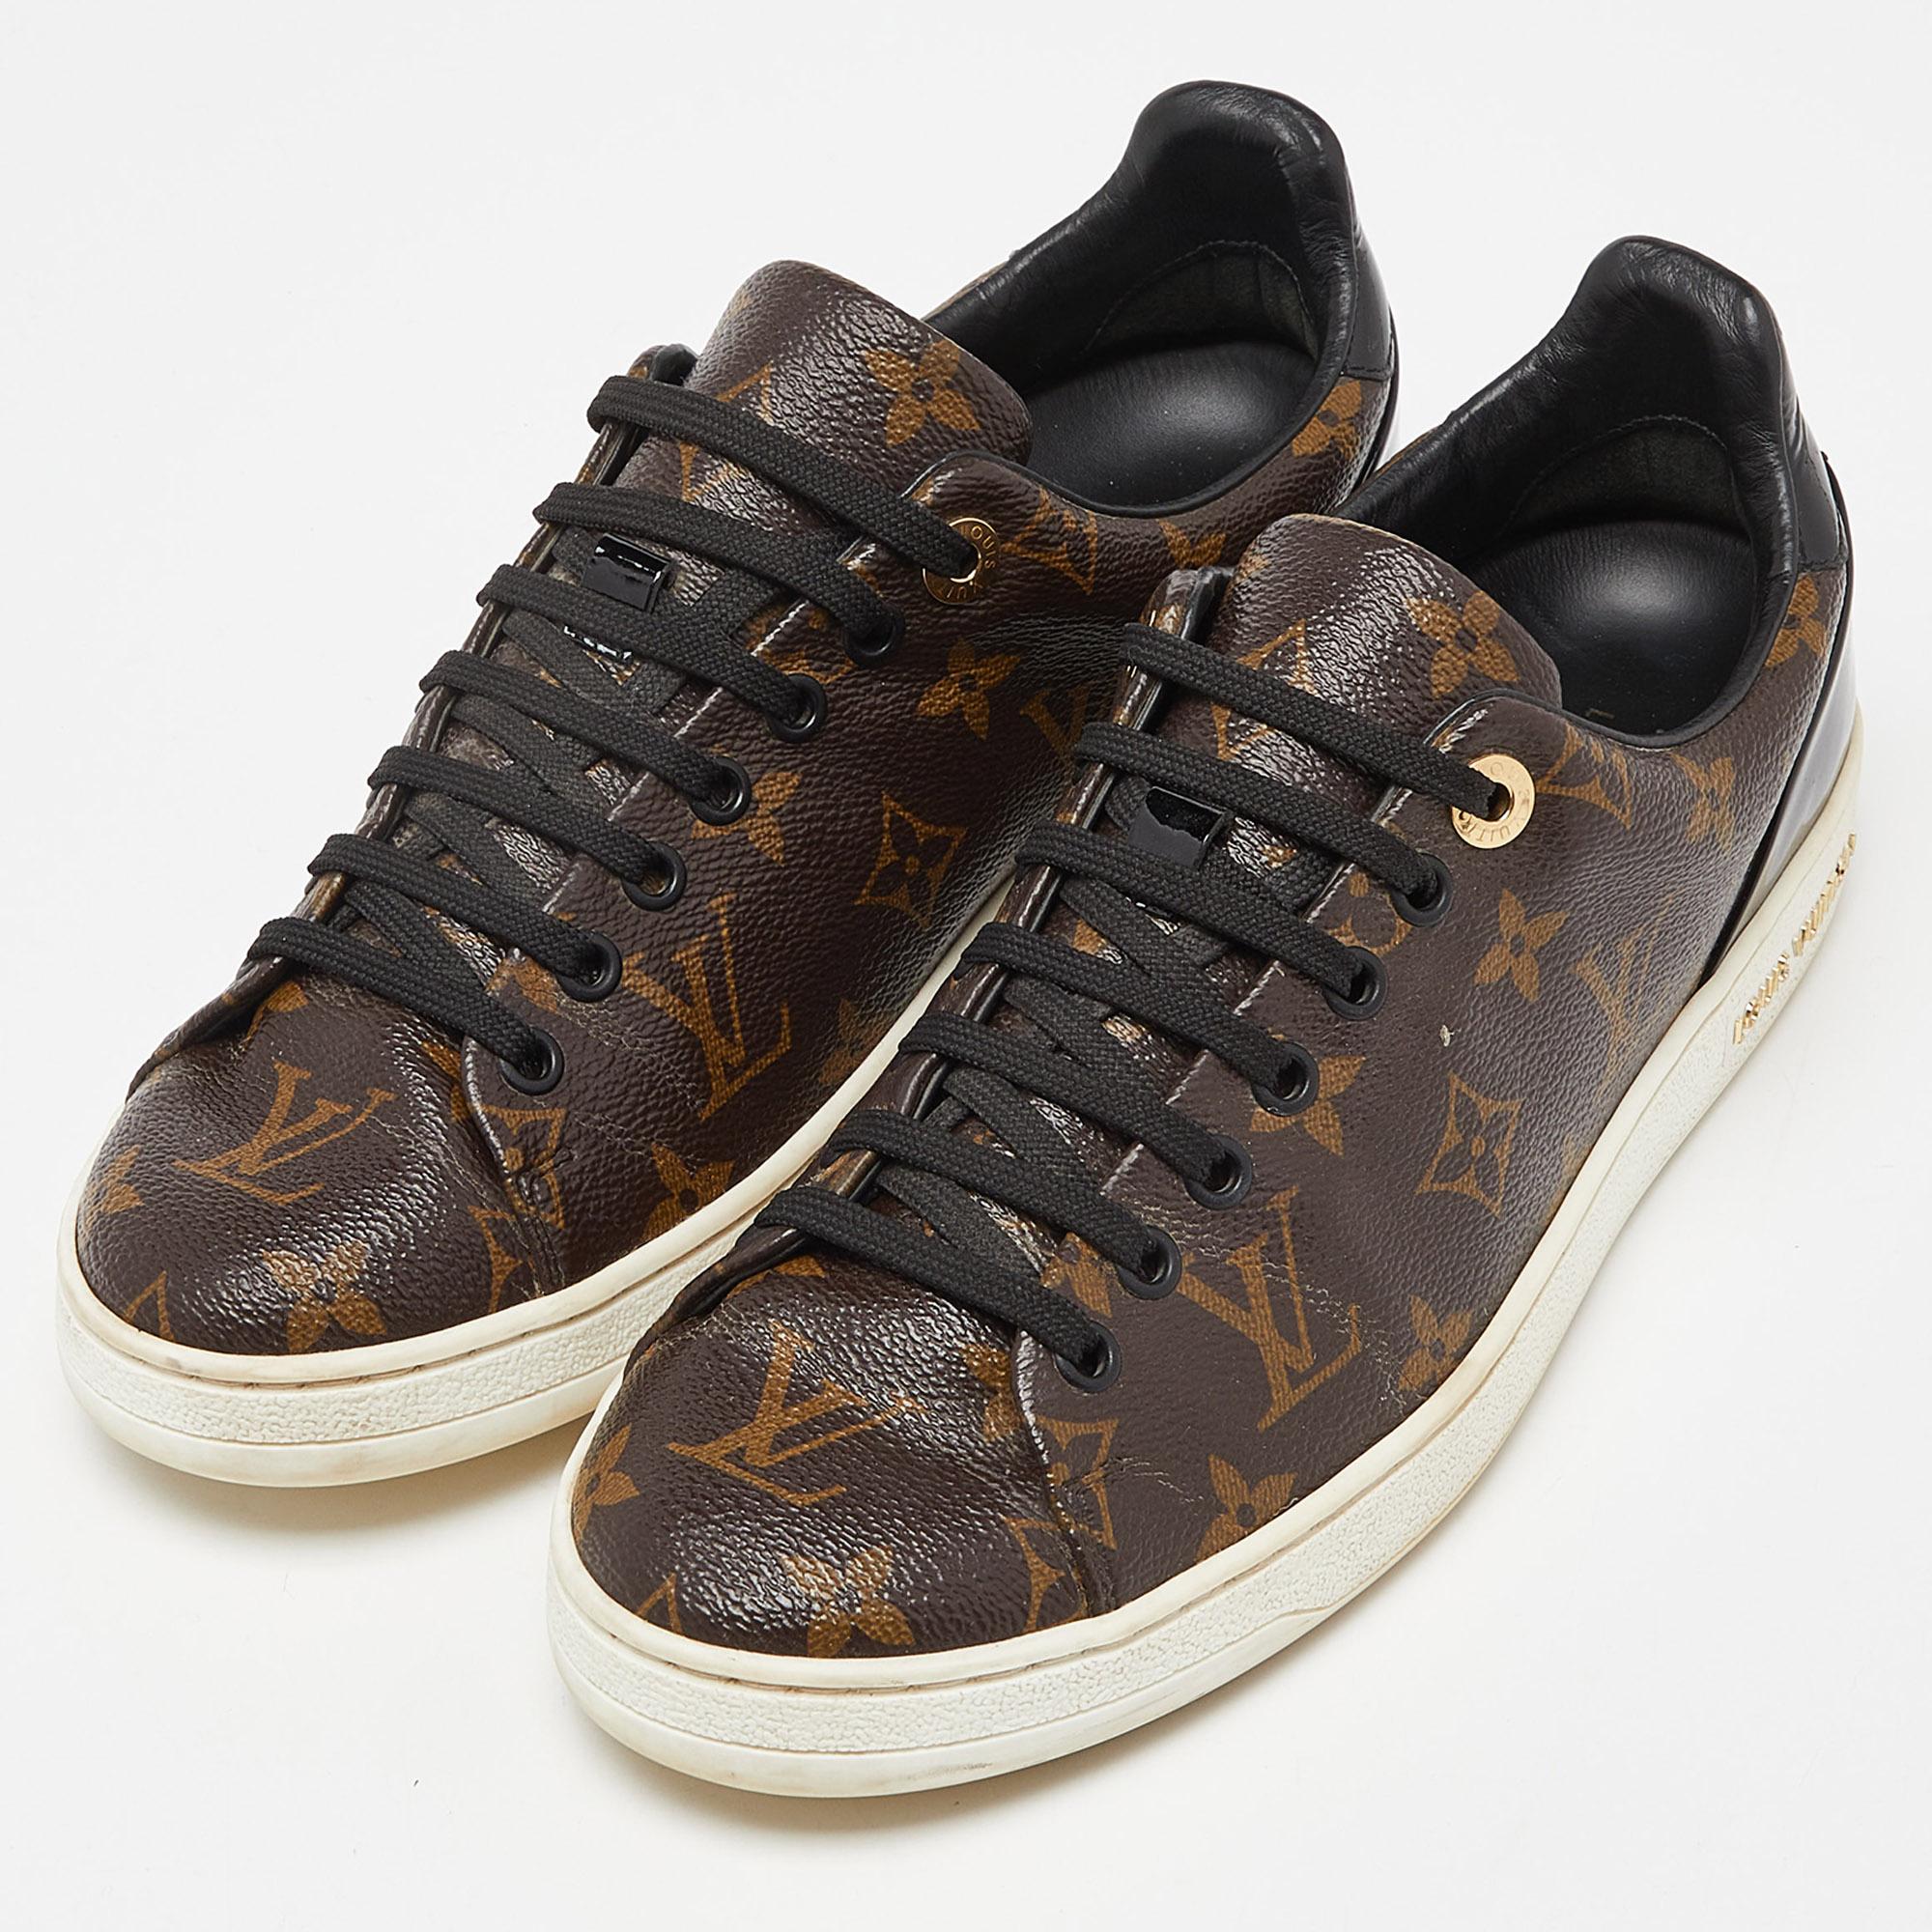 These Frontrow sneakers from Louis Vuitton are all you need to add an extra edge to your outfit. This pair has been crafted from monogram canvas and styled with round toes, lace-ups and gold-tone logo details on the midsoles. Balanced on rubber